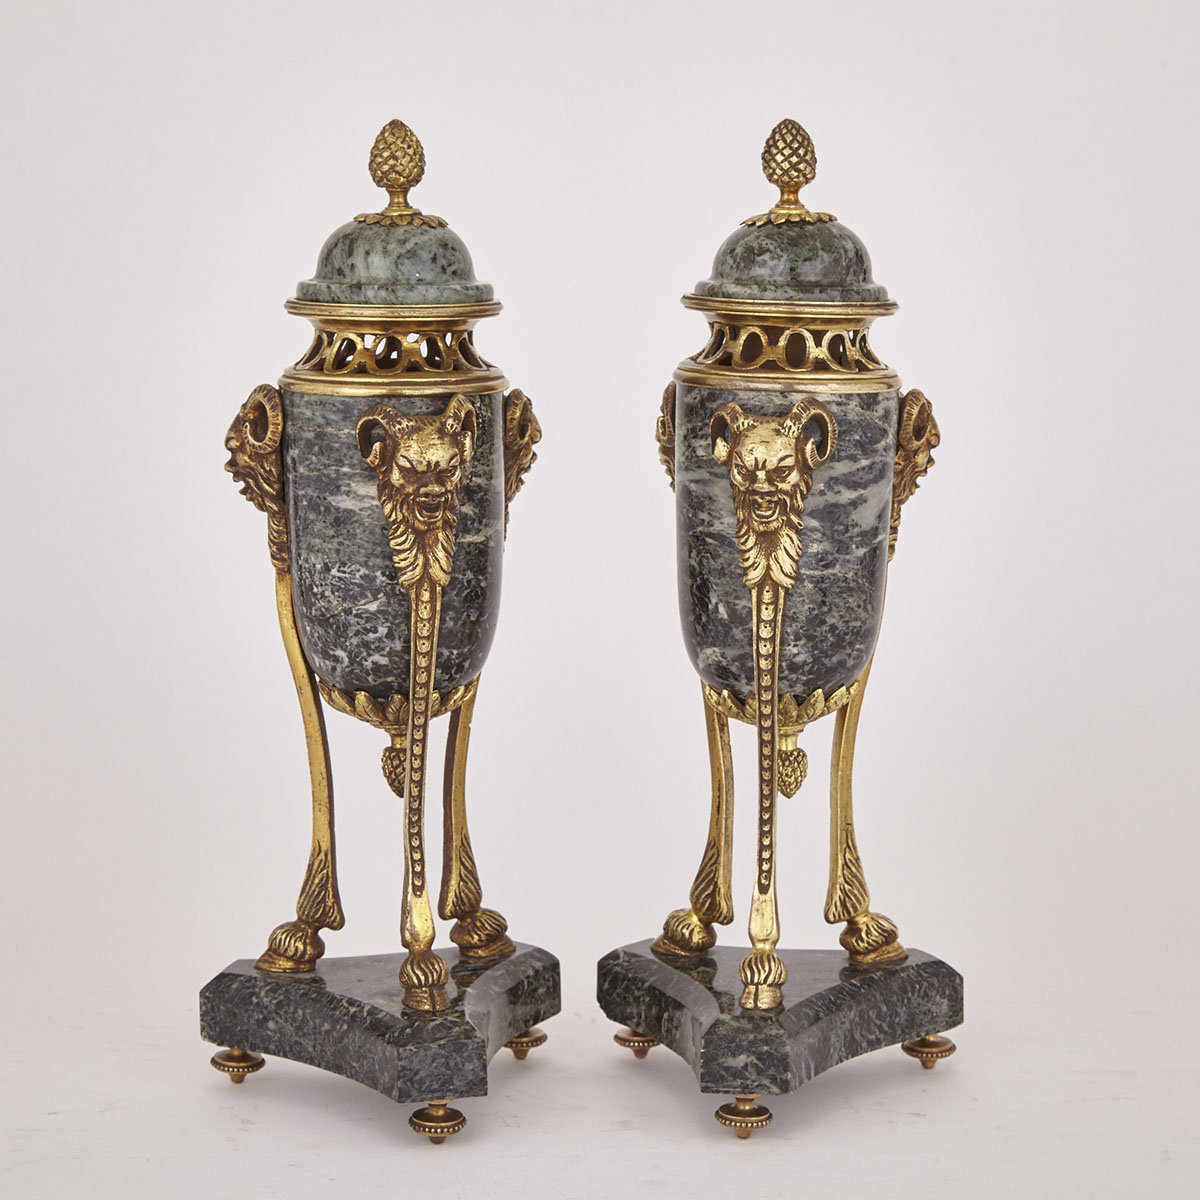 Pair of Louix XVI Style Ormolu Mounted Verde Antico Marble Cassolettes, late19th/early 20th century